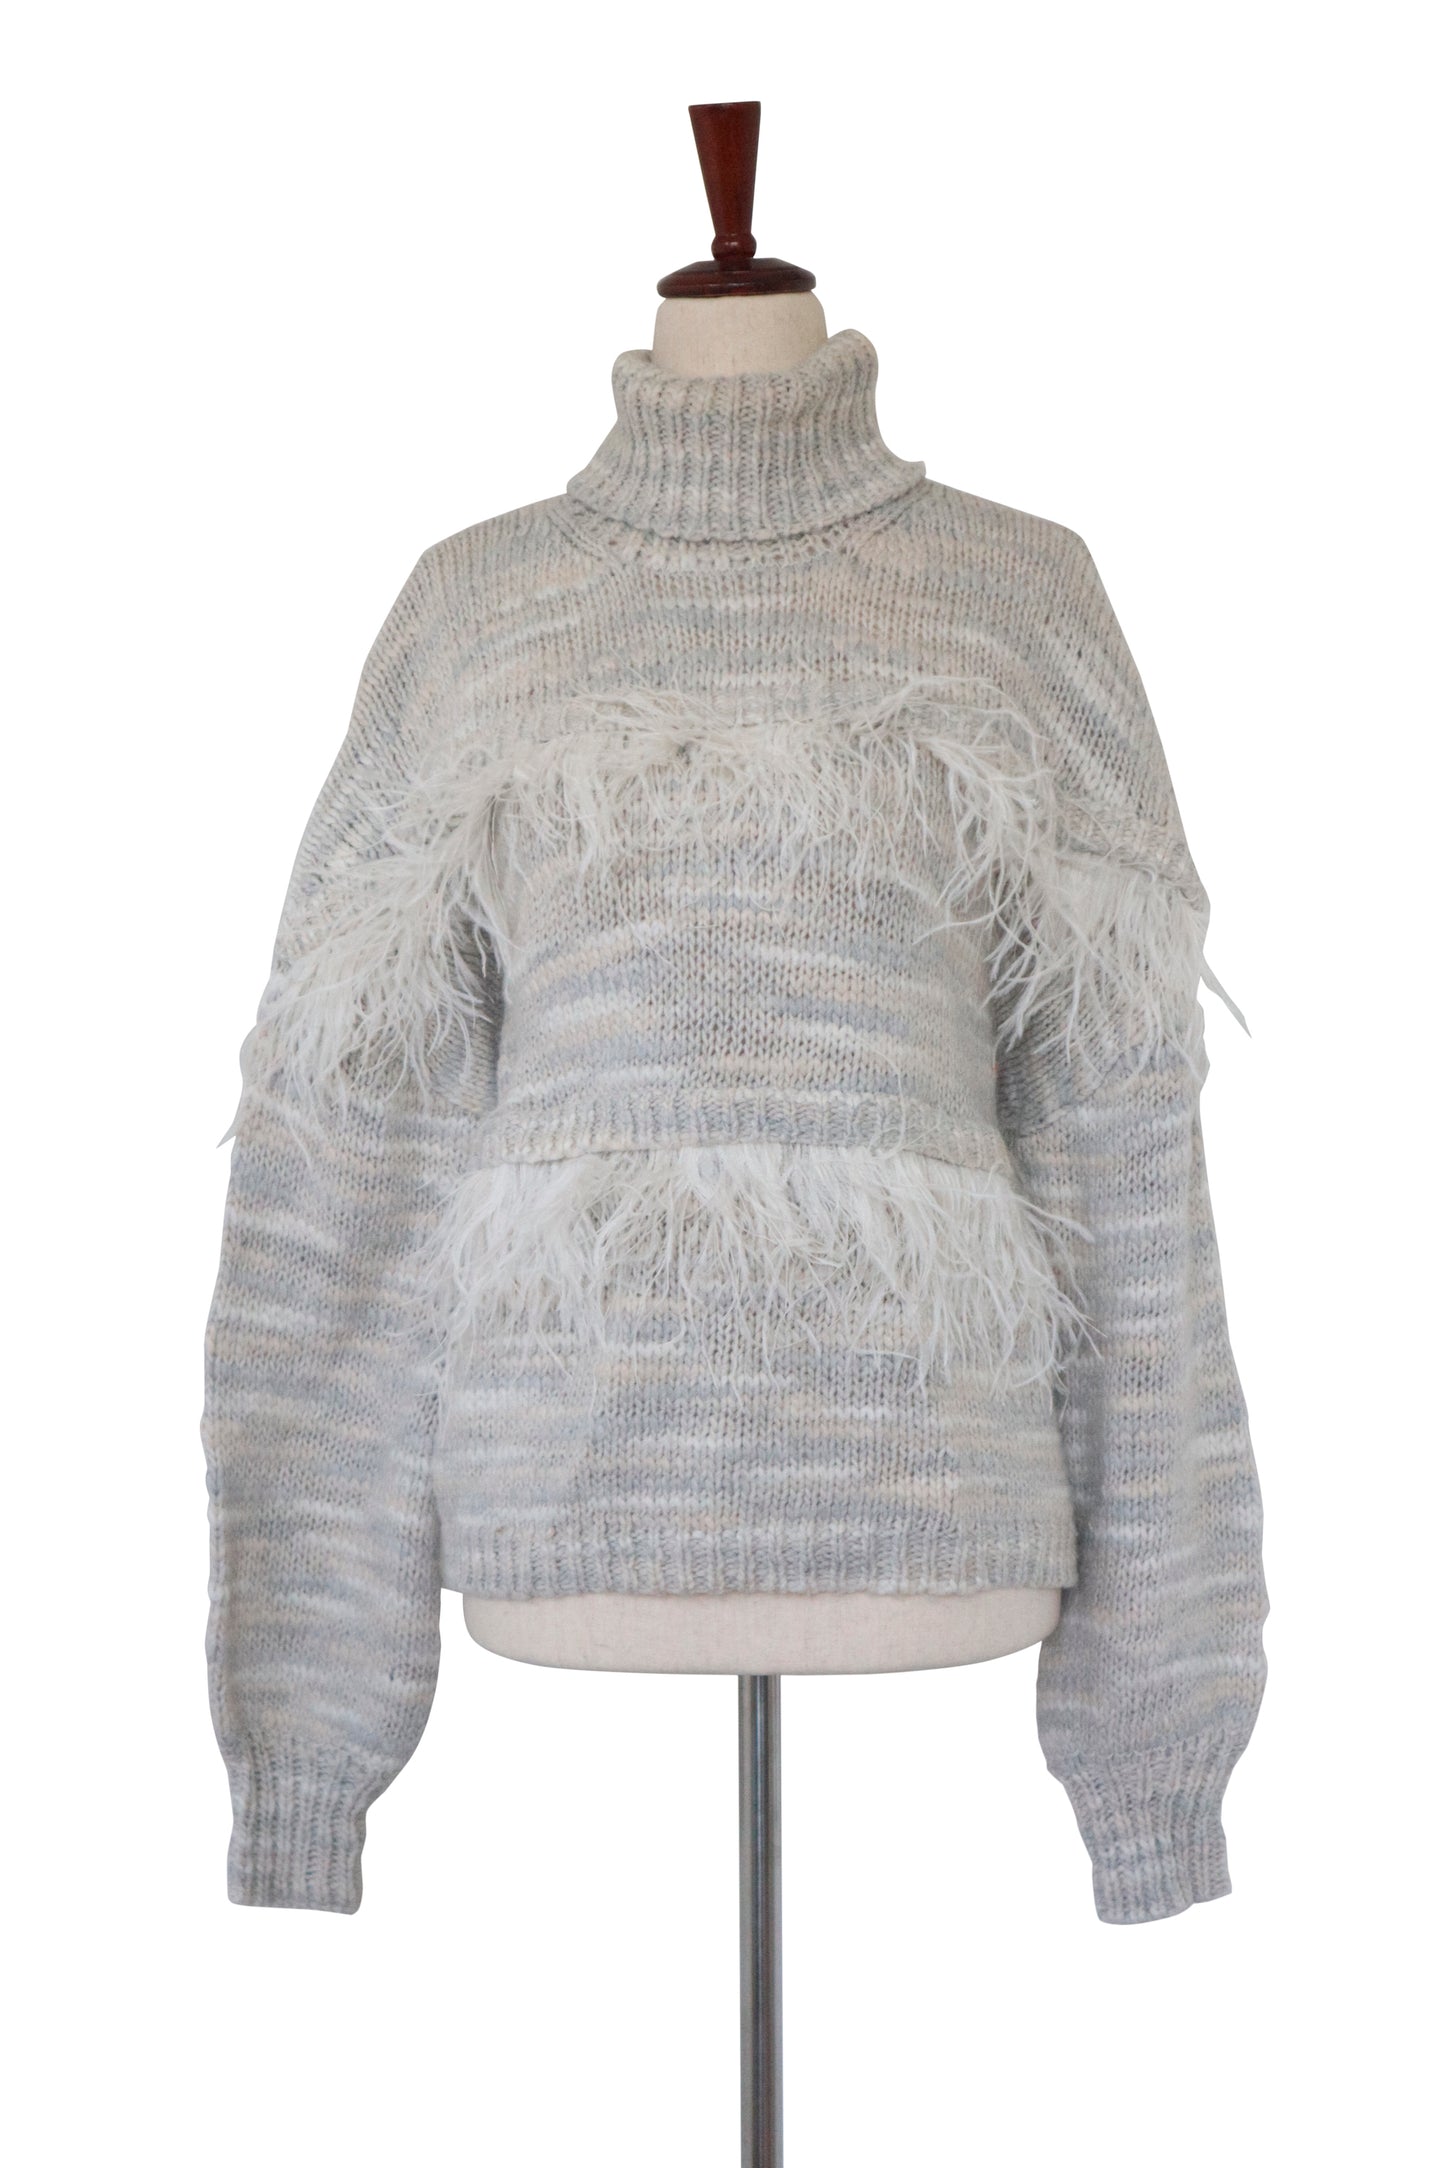 CINQ A SEPT - Feather Sweater - Size M